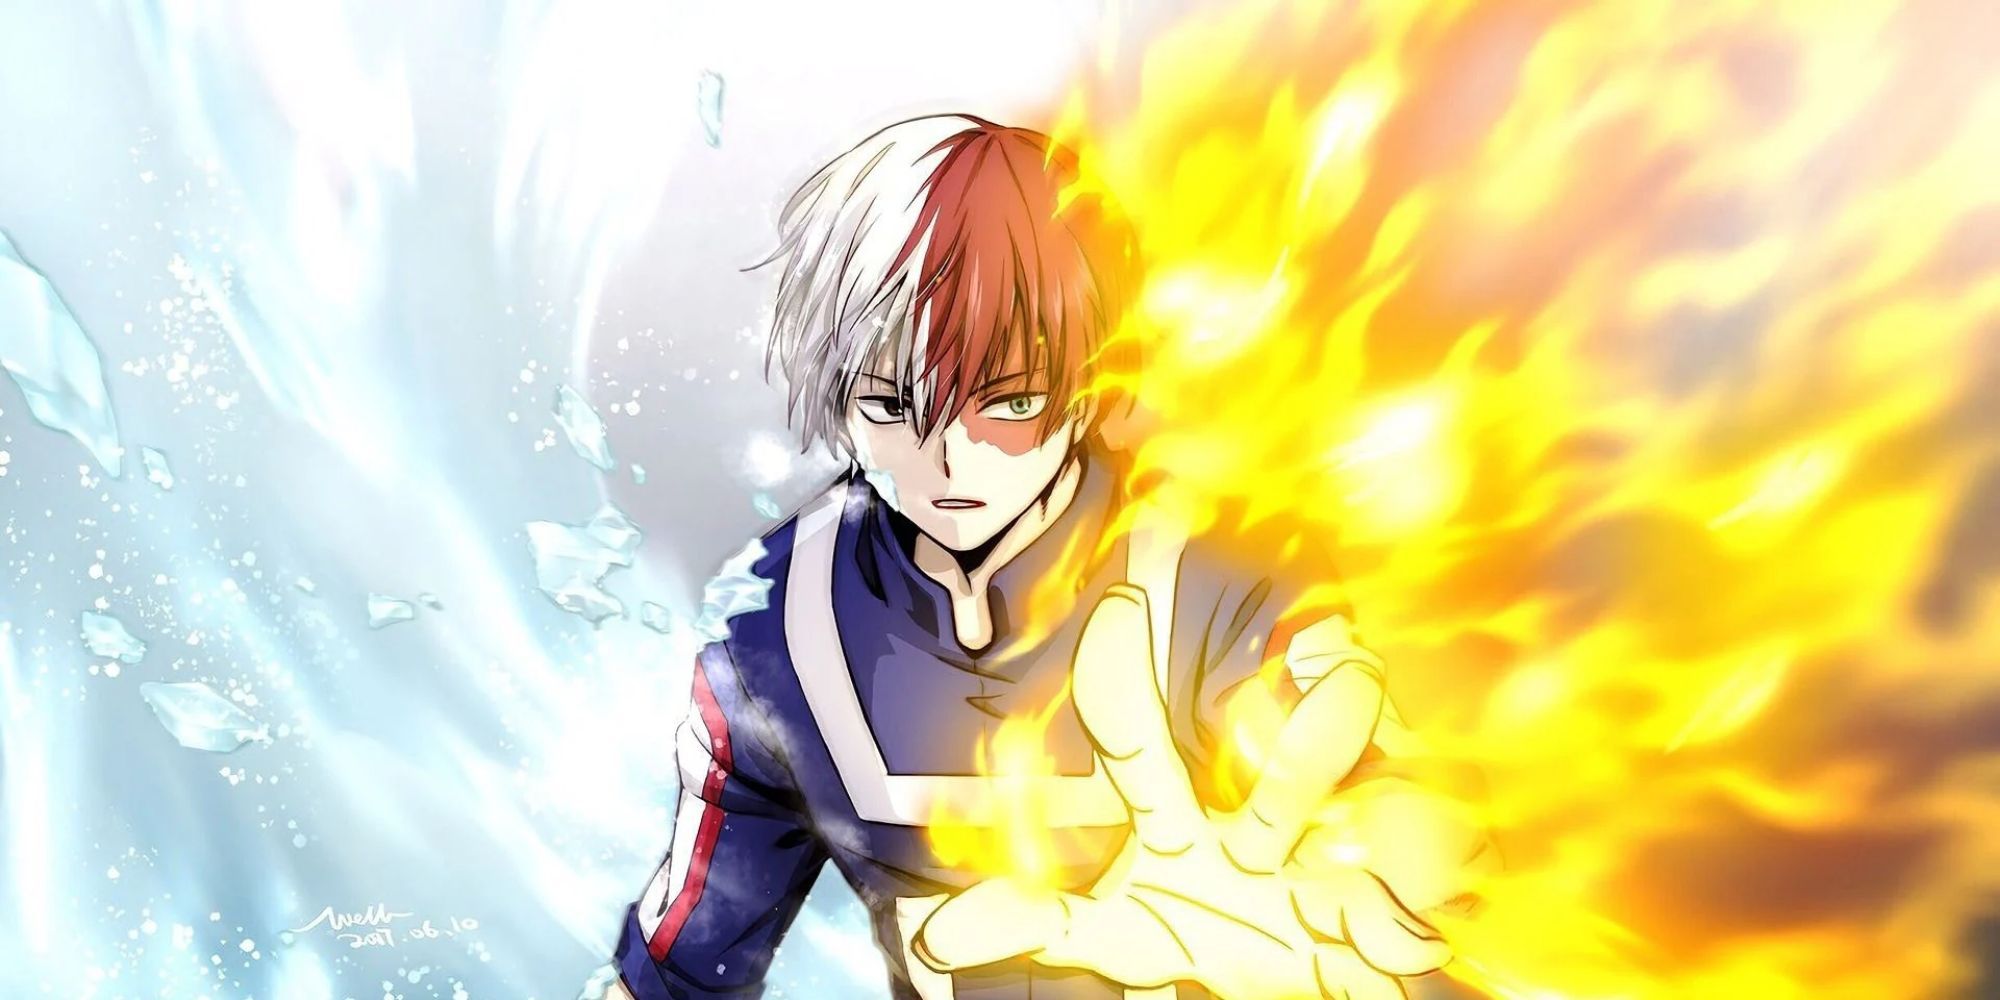 Who is the strongest fire user you can think of in anime? - Quora